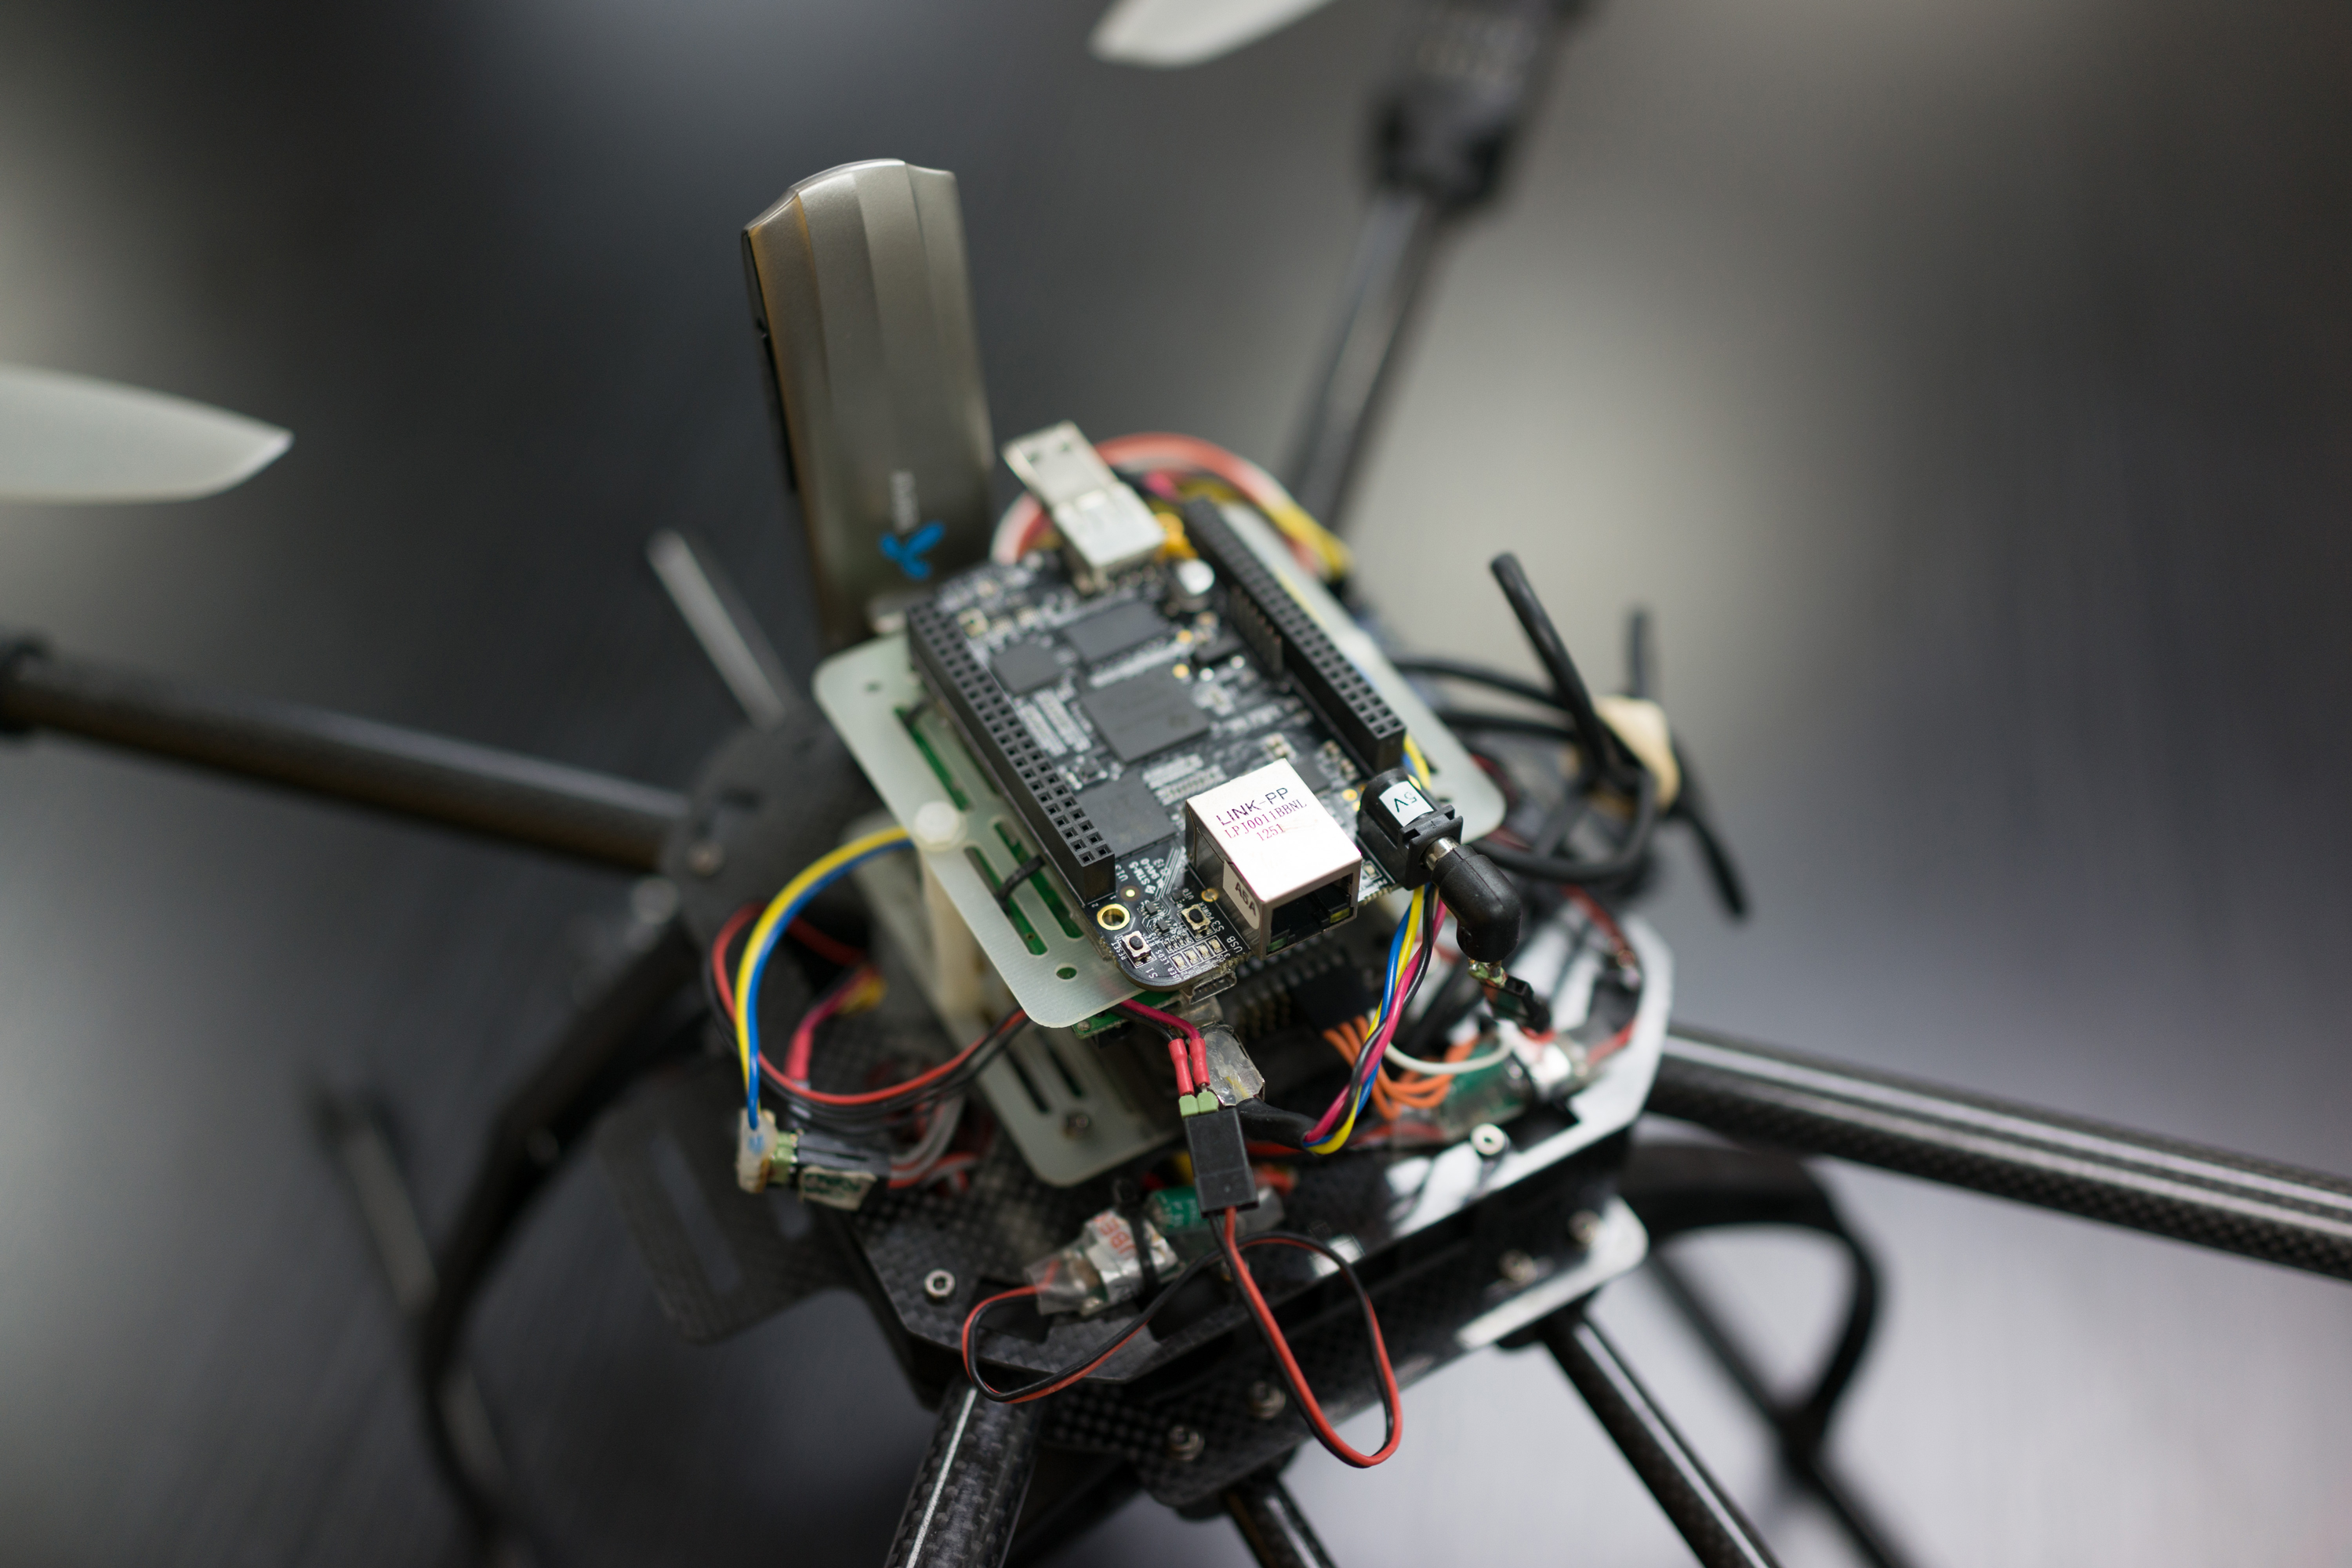 Sky Drone FPV mounted on a Quadcopter drone, detail